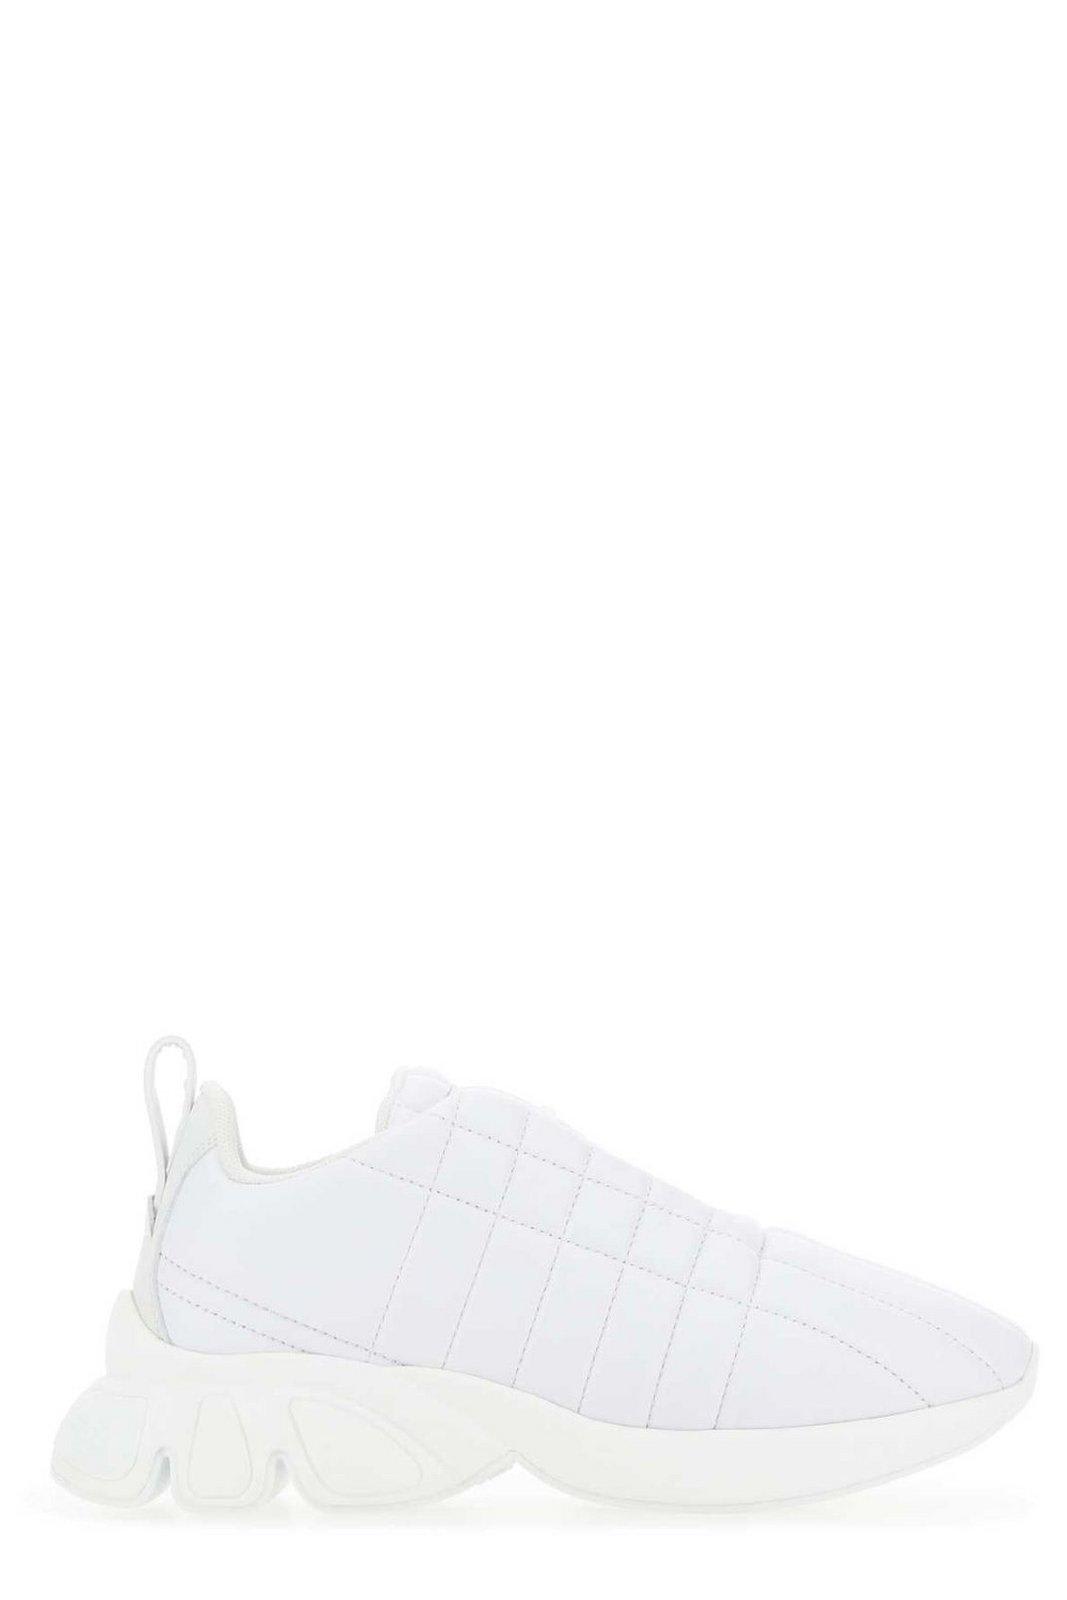 Burberry Quilted Slip-on Sneakers